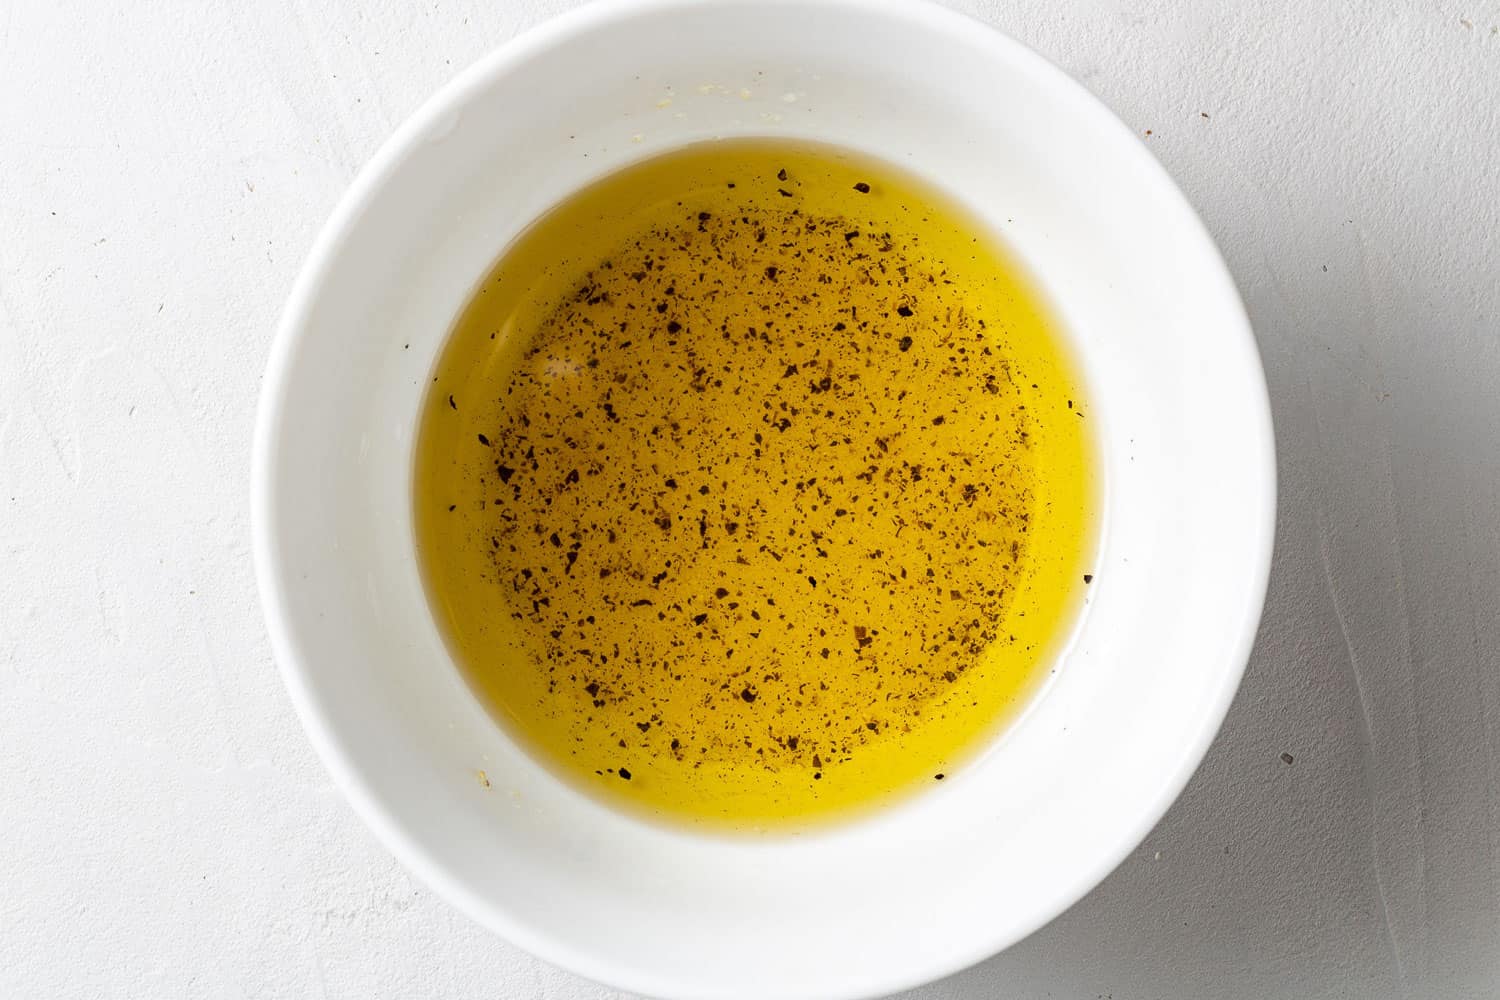 Olive oil based salad dressing in a small white bowl.